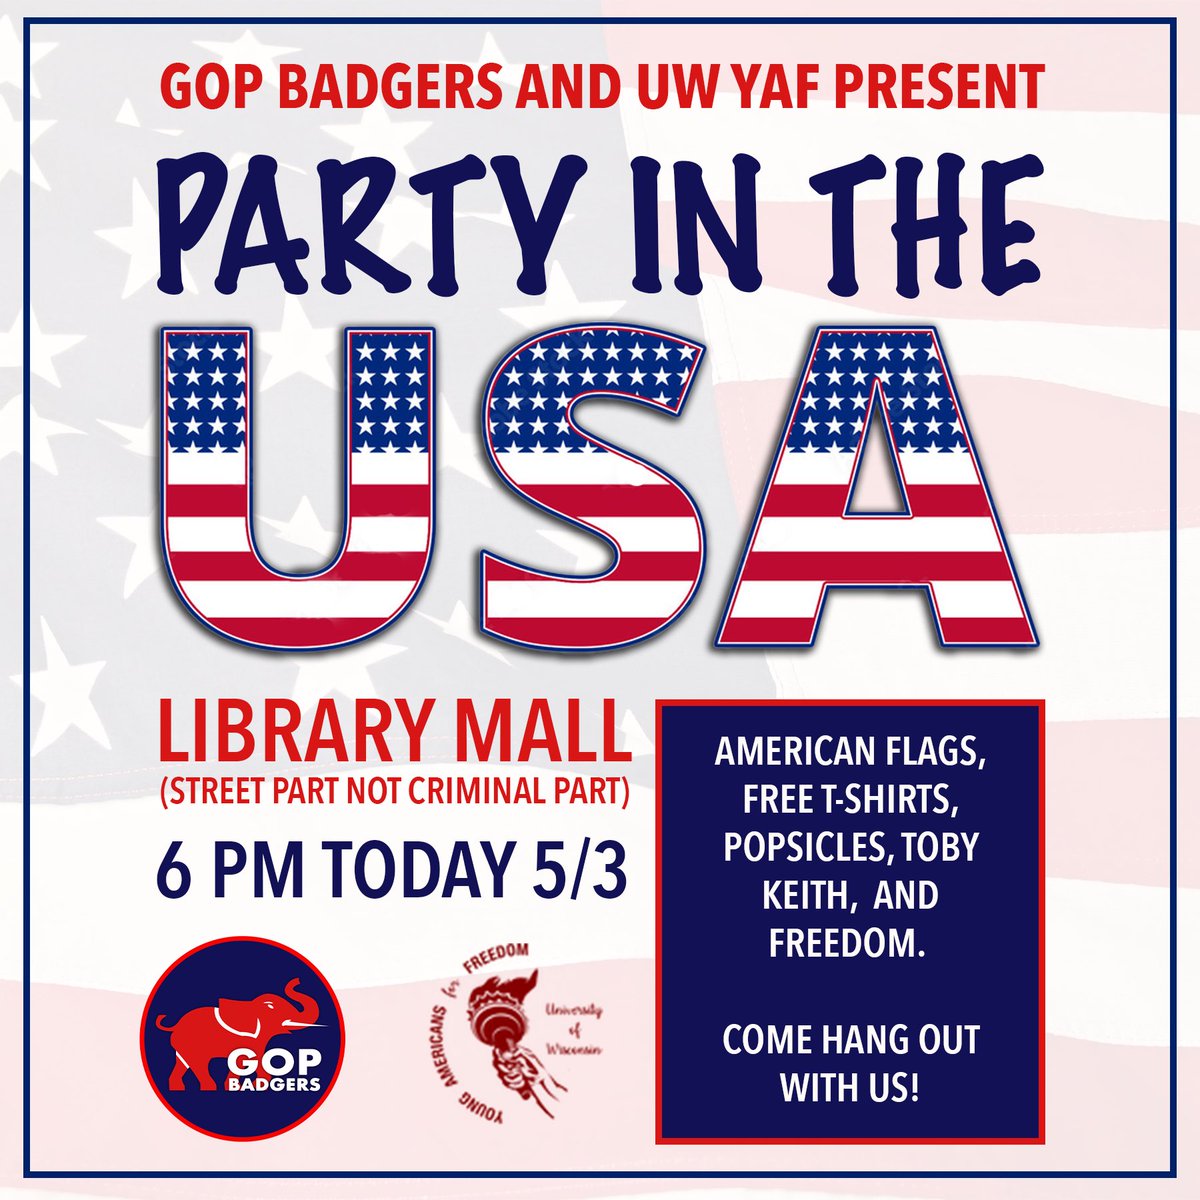 Come hang out with us on Library Mall to celebrate everything that makes America great! We'll have free t-shirts, American flags, pocket constitutions, and popsicles!